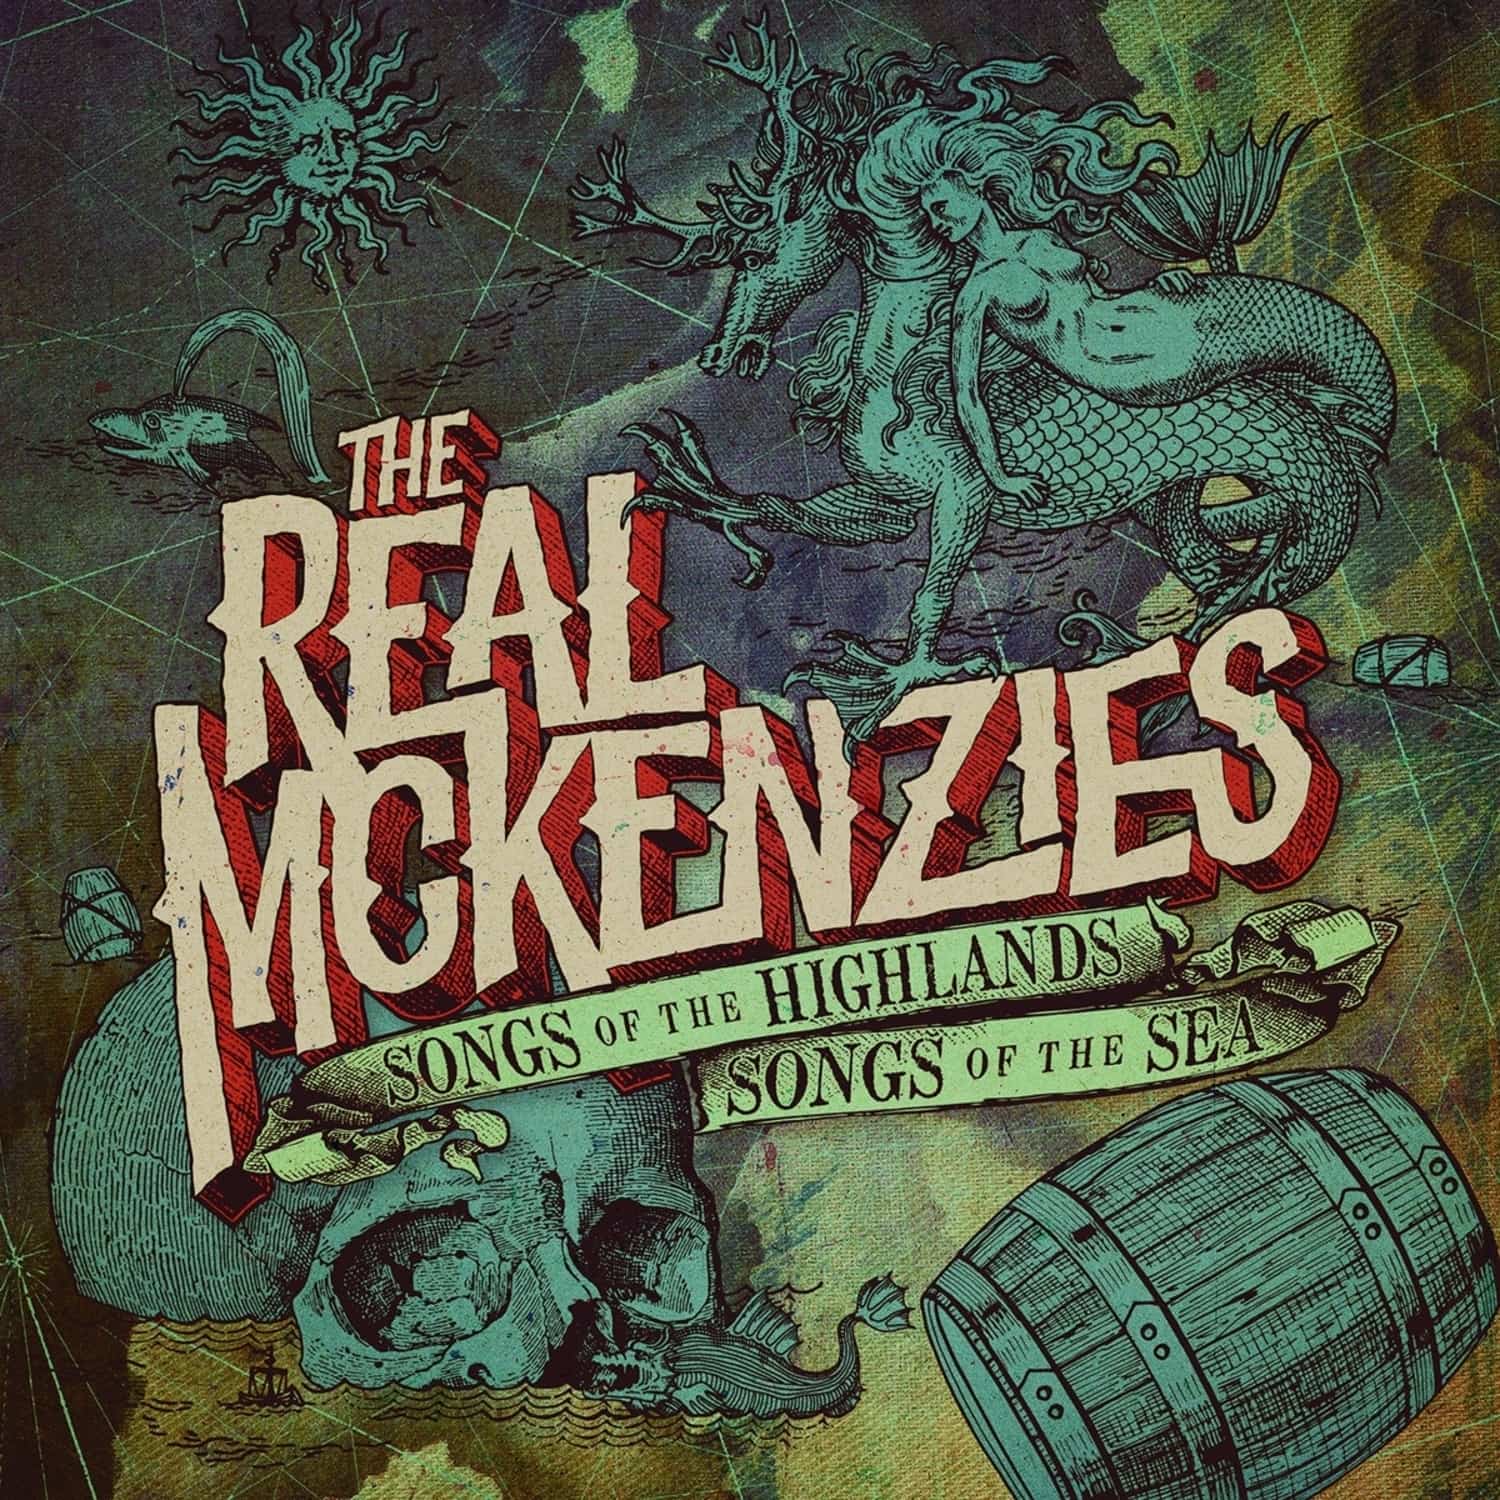 Real McKenzies - SONGS OF THE HIGHLANDS, SONGS OF THE SEA Transparent Red Vinyl